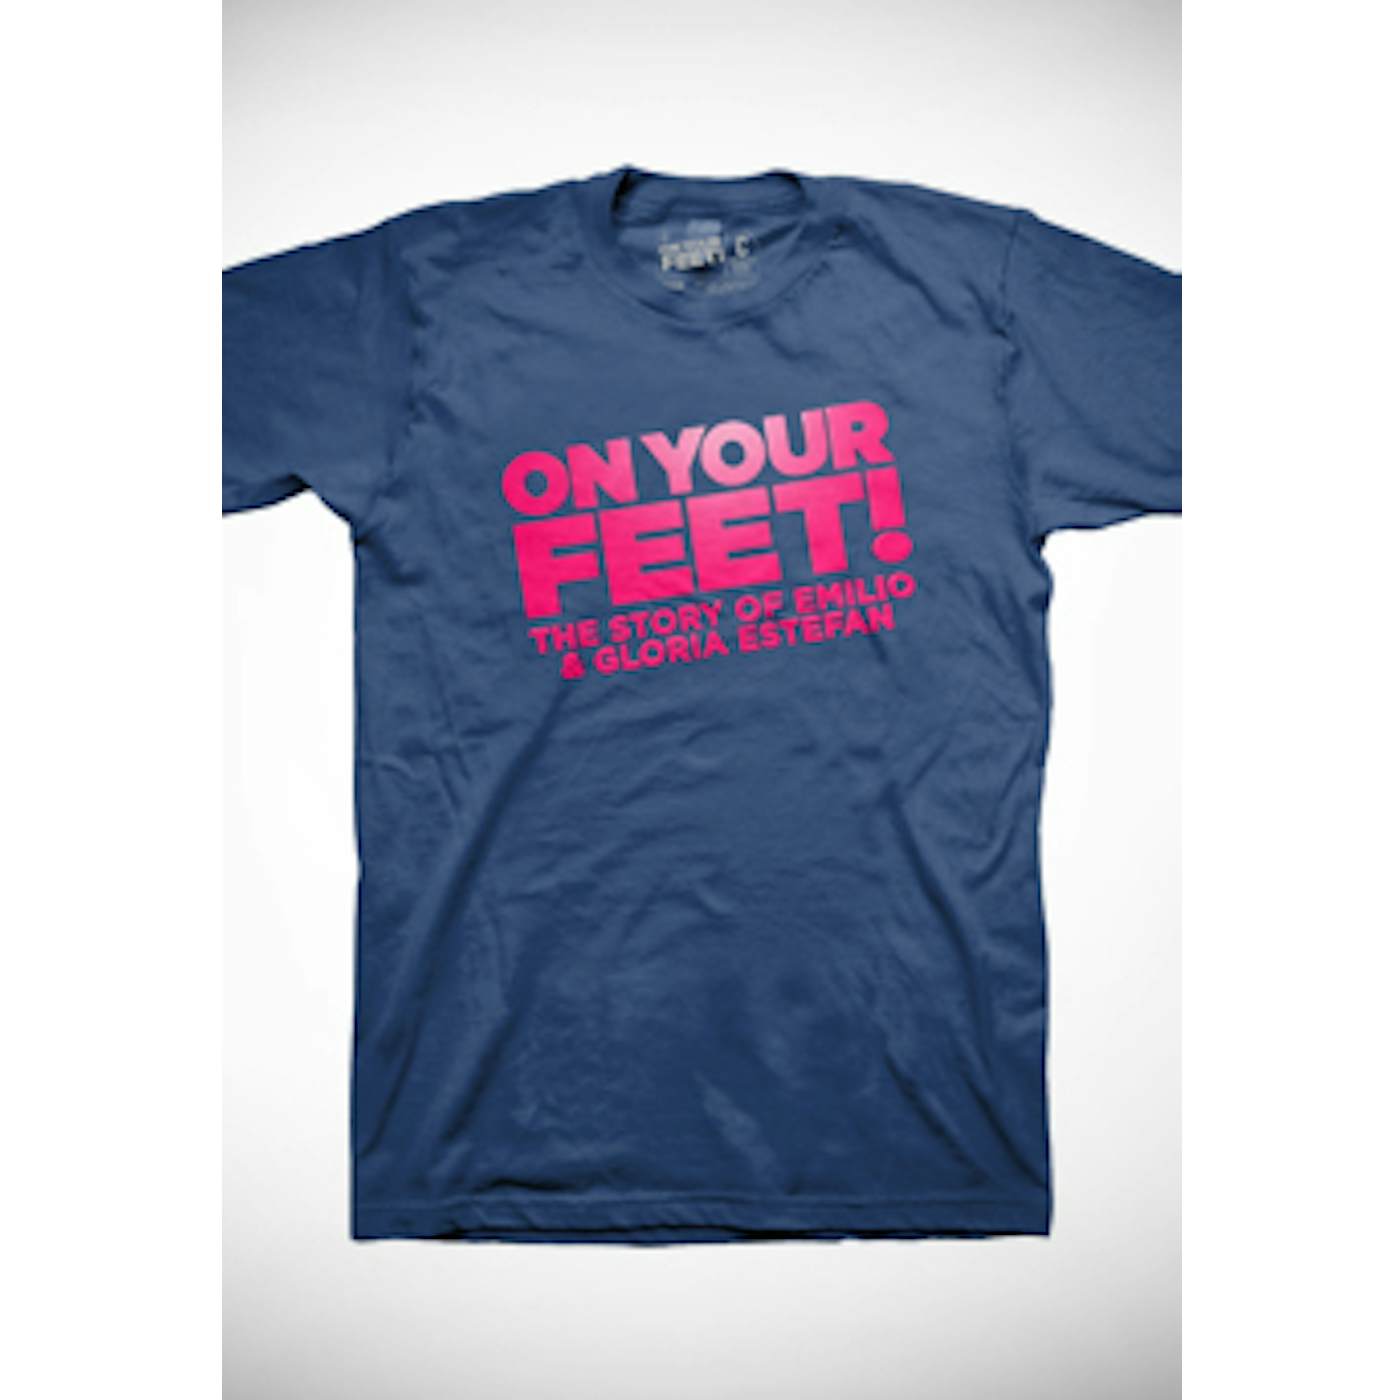 ON YOUR FEET: THE STORY OF EMILIO & GLORIA On Your Feet Pink Logo On Blue T-shirt